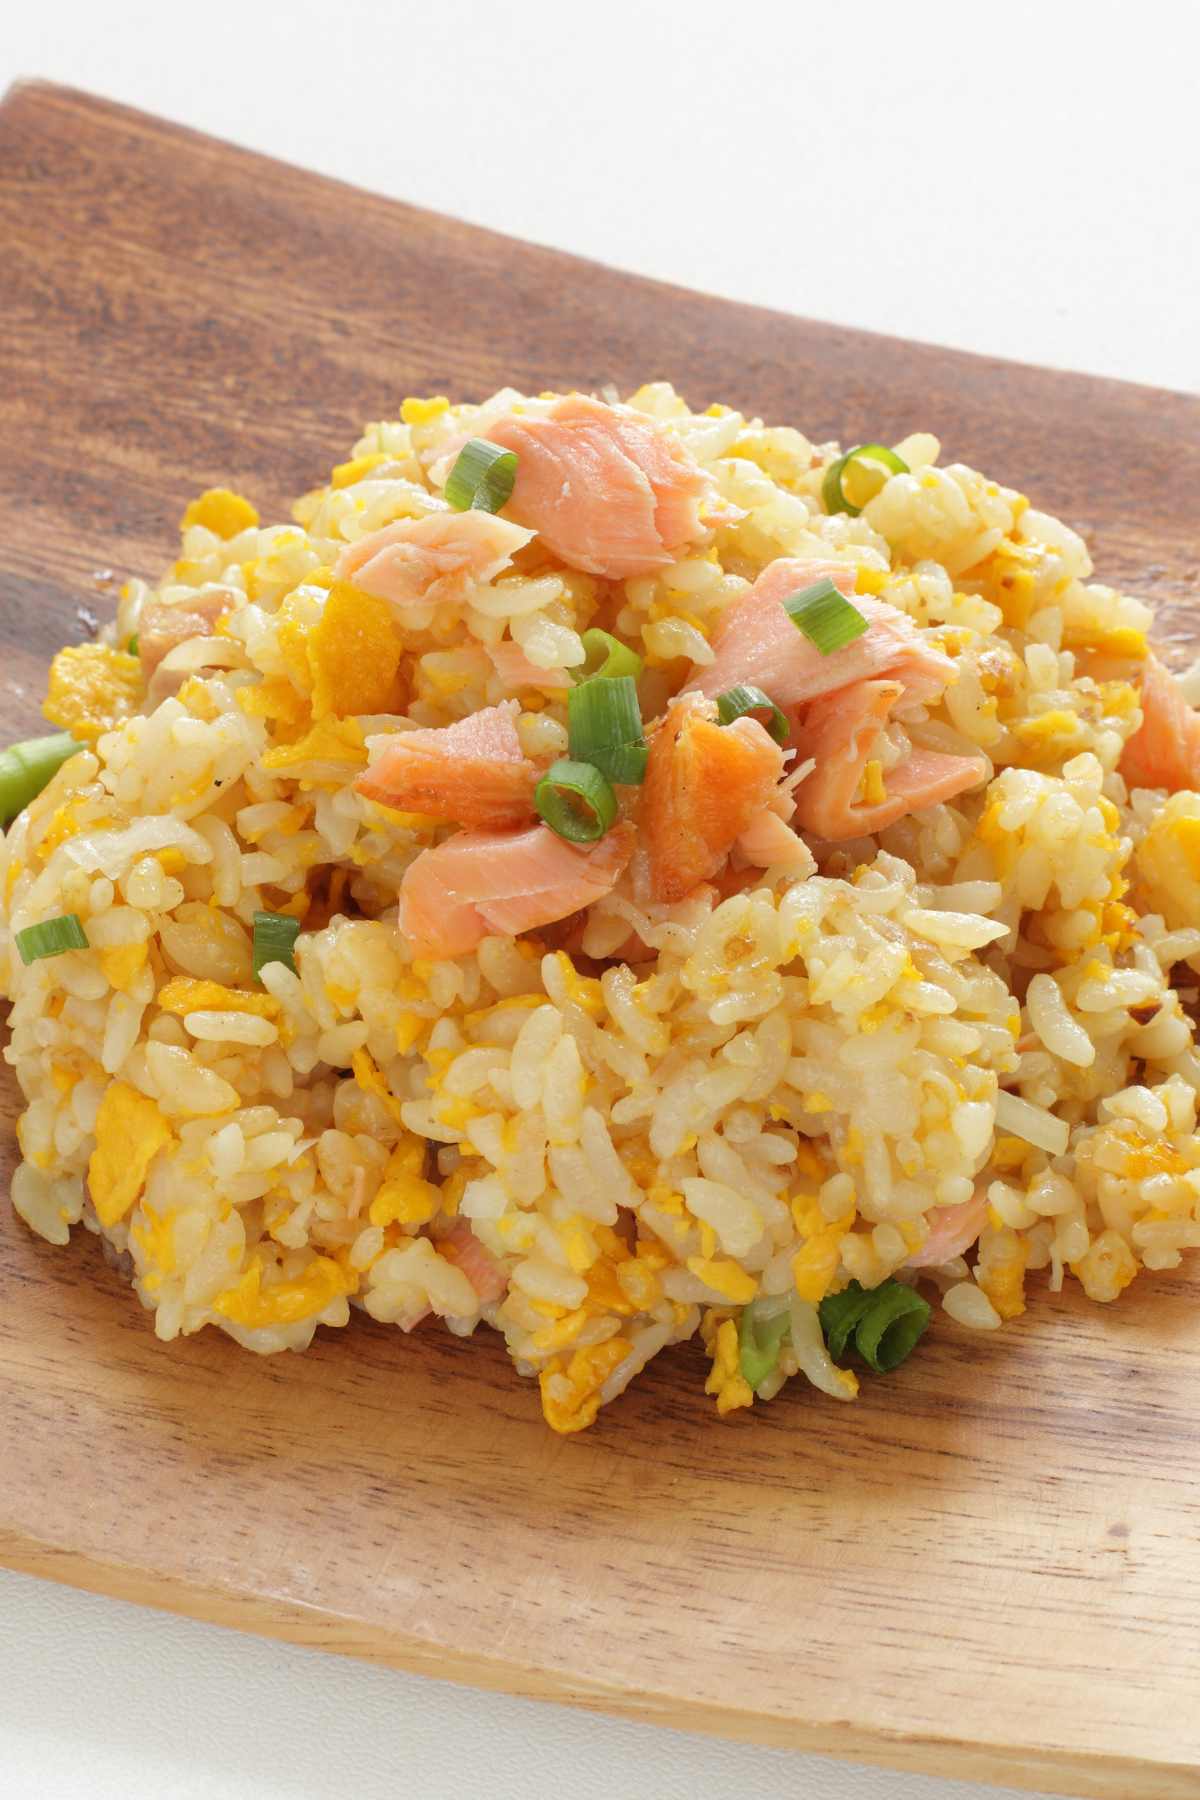 Got leftover rice from the night before? Perfect! This delicious Salmon and Rice Recipe combines leftover cooked rice and salmon to create a delicious fried rice dish with a twist!